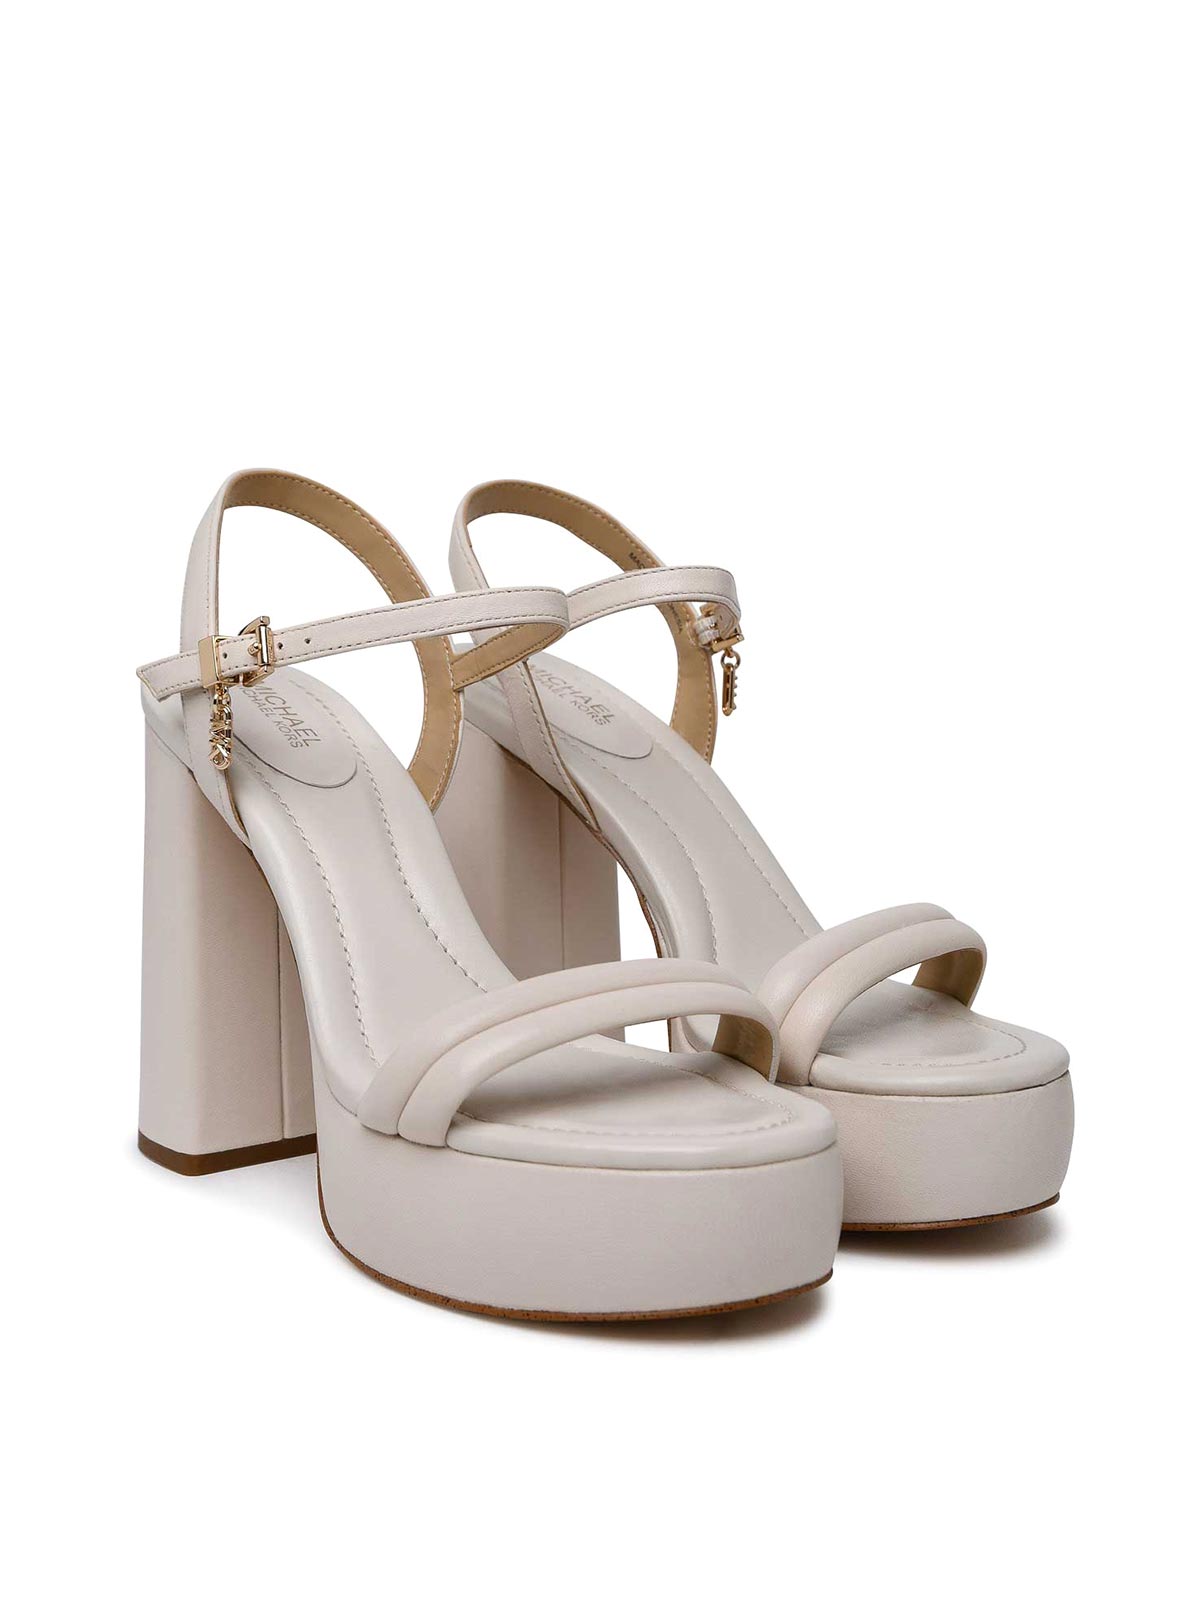 Shop Michael Kors Lavced Sandals In Cream